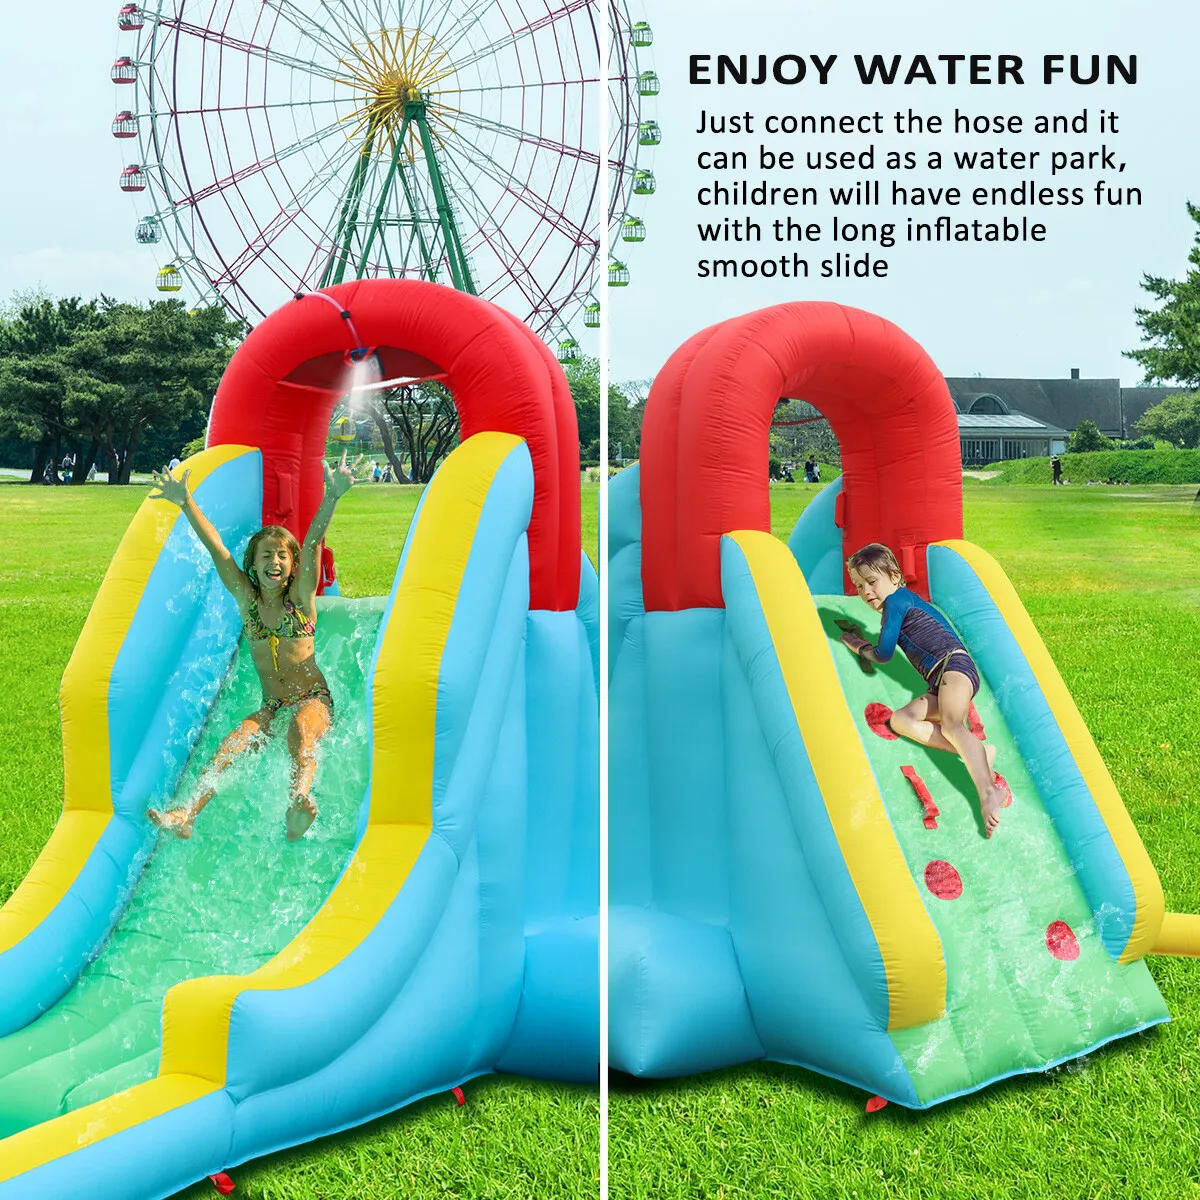 water park | Stay at Home Mum.com.au